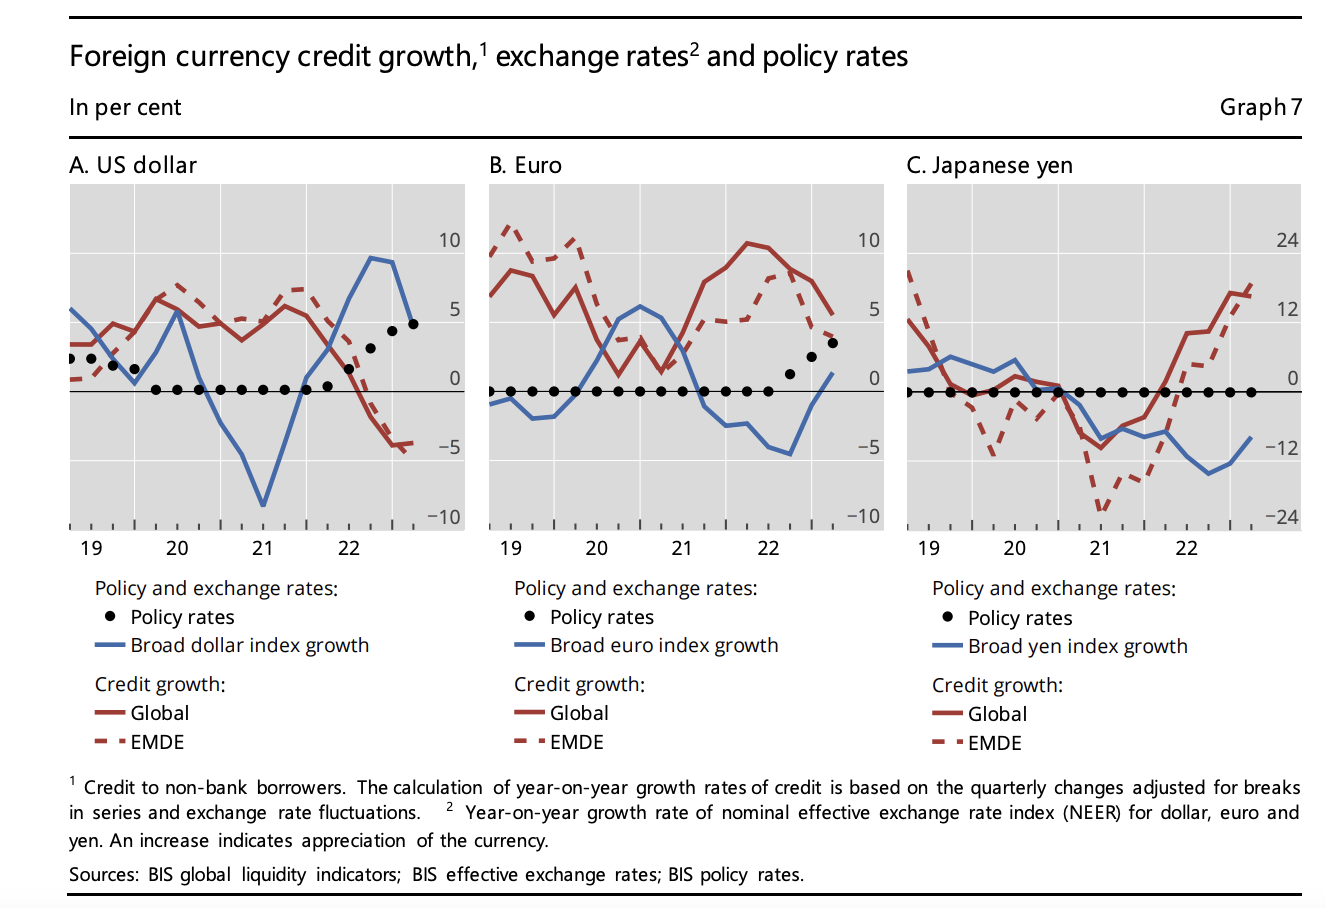 Foreign currency credit growth, exchange rates, and policy rates